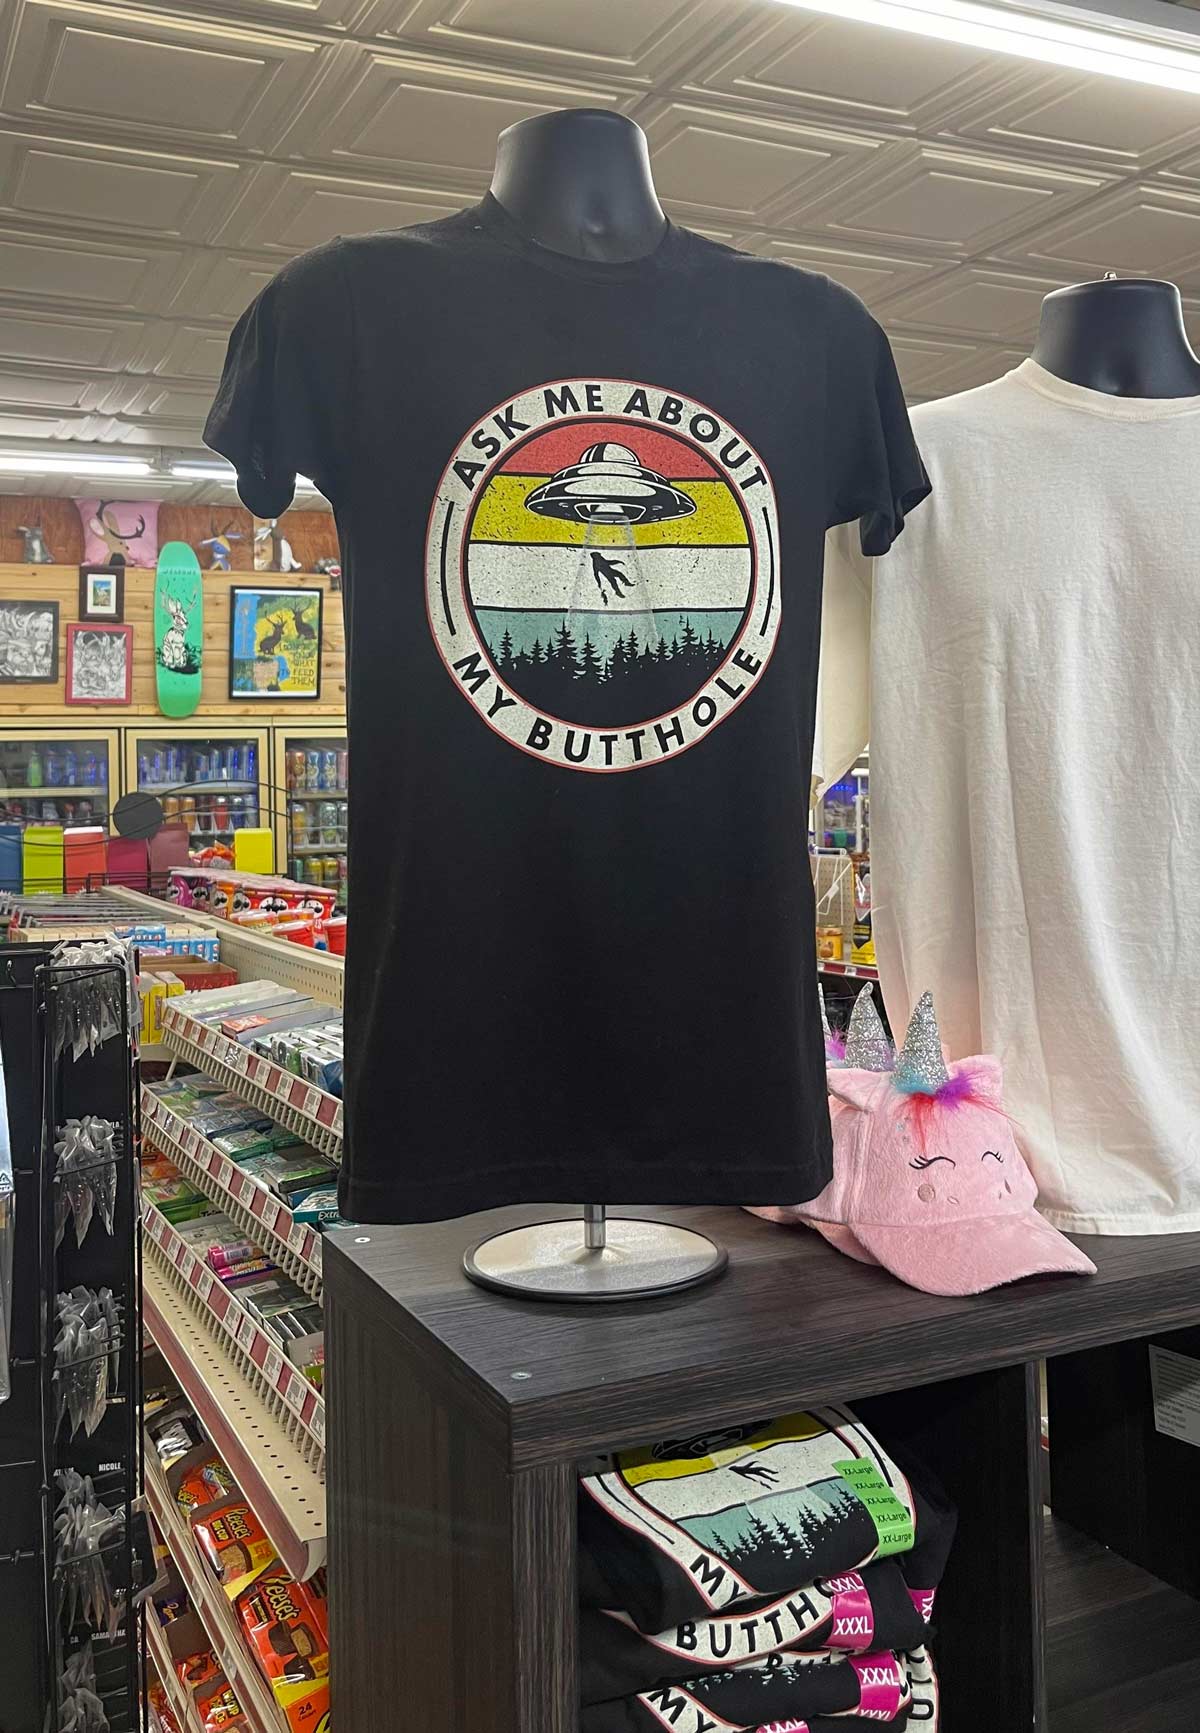 Interesting t-shirt at a shop in Wyoming